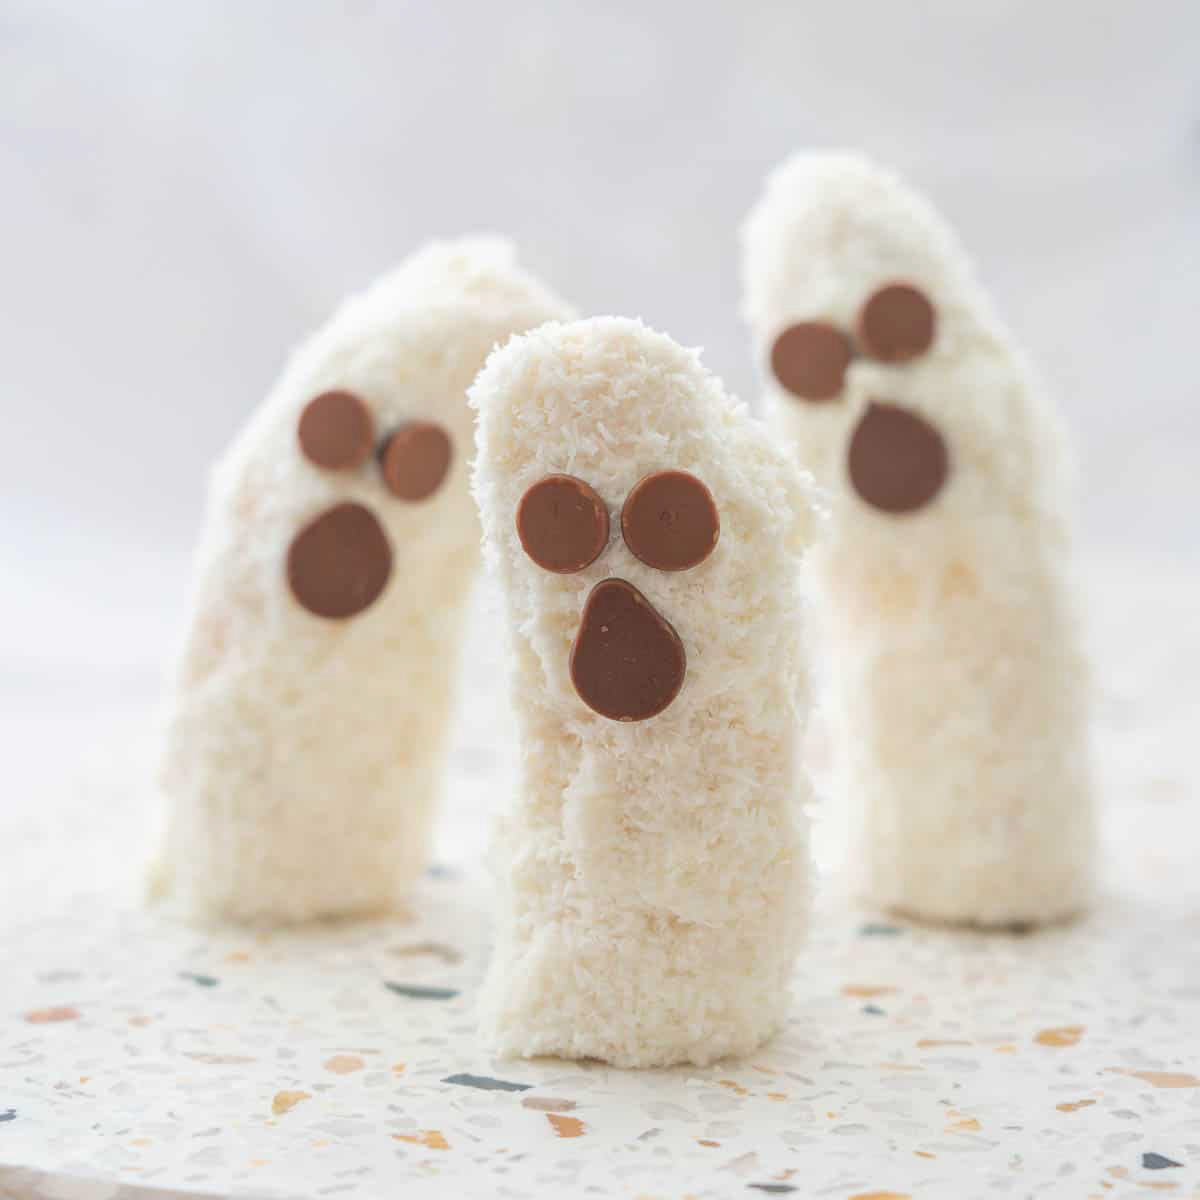 Coconut banana ghosts - healthy Halloween desserts - on a white background.